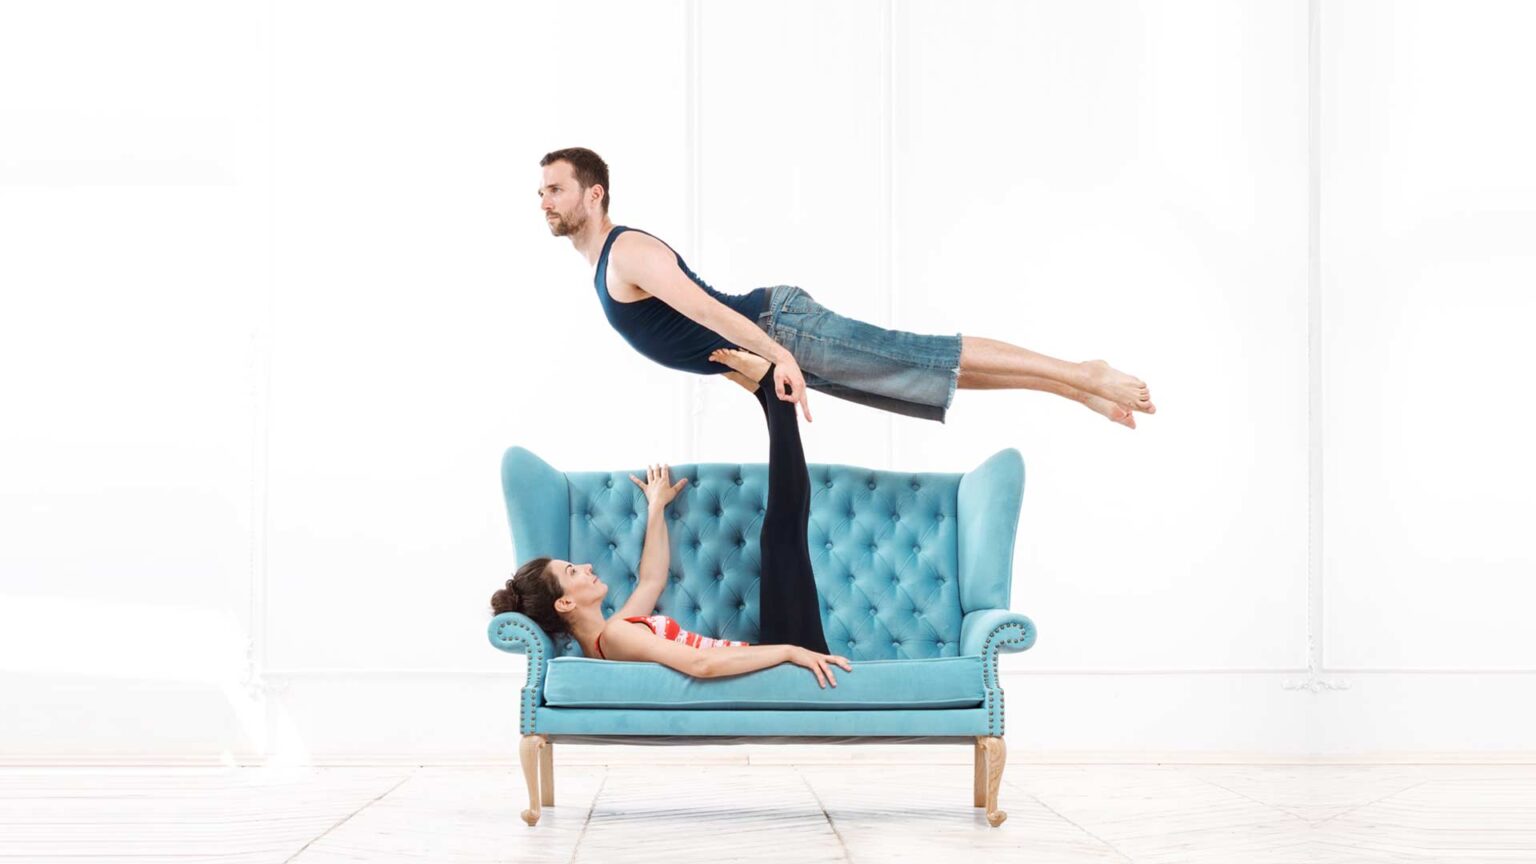 A couple practicing acro yoga on a blue chair